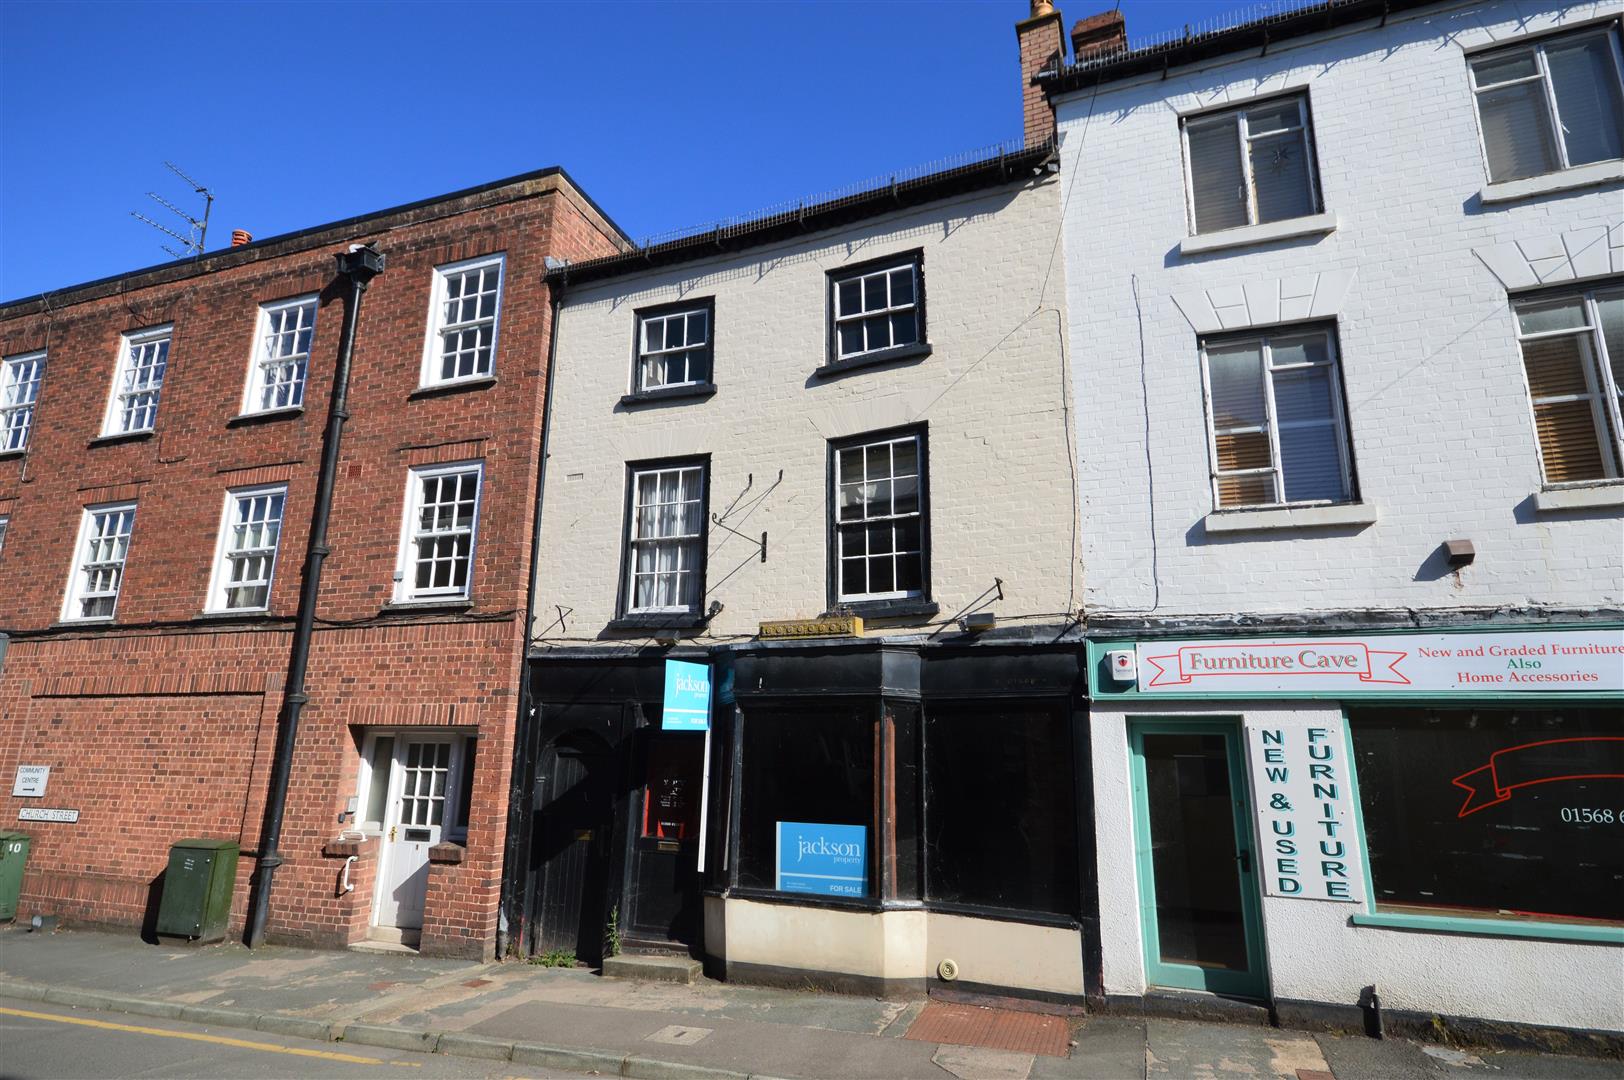 3 bed town house for sale in Leominster, HR6